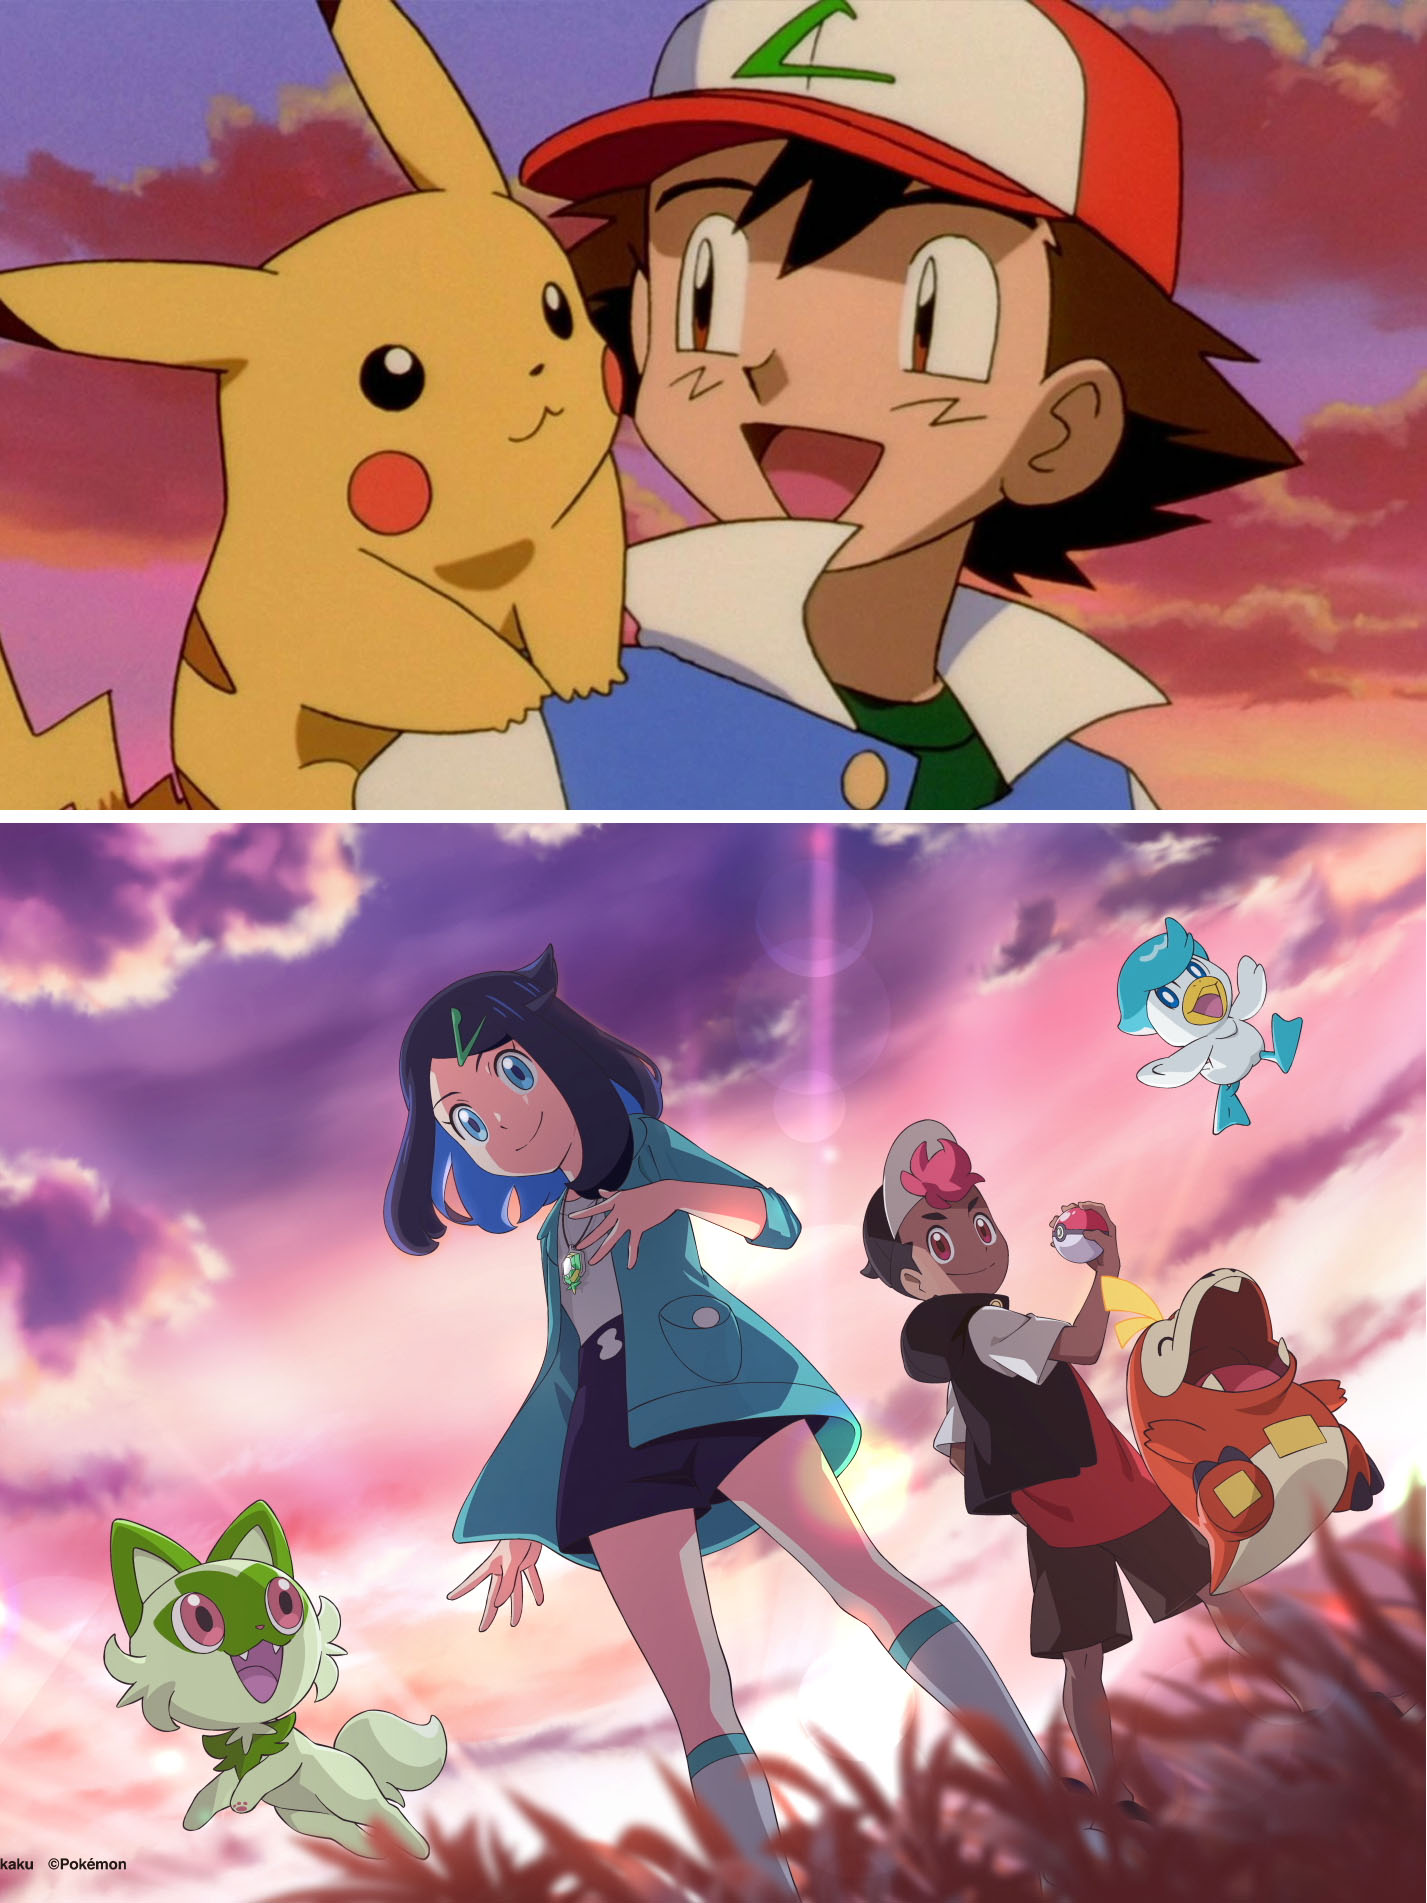 Could Pokemon Journeys Give Us the Perfect Ending for Ash?